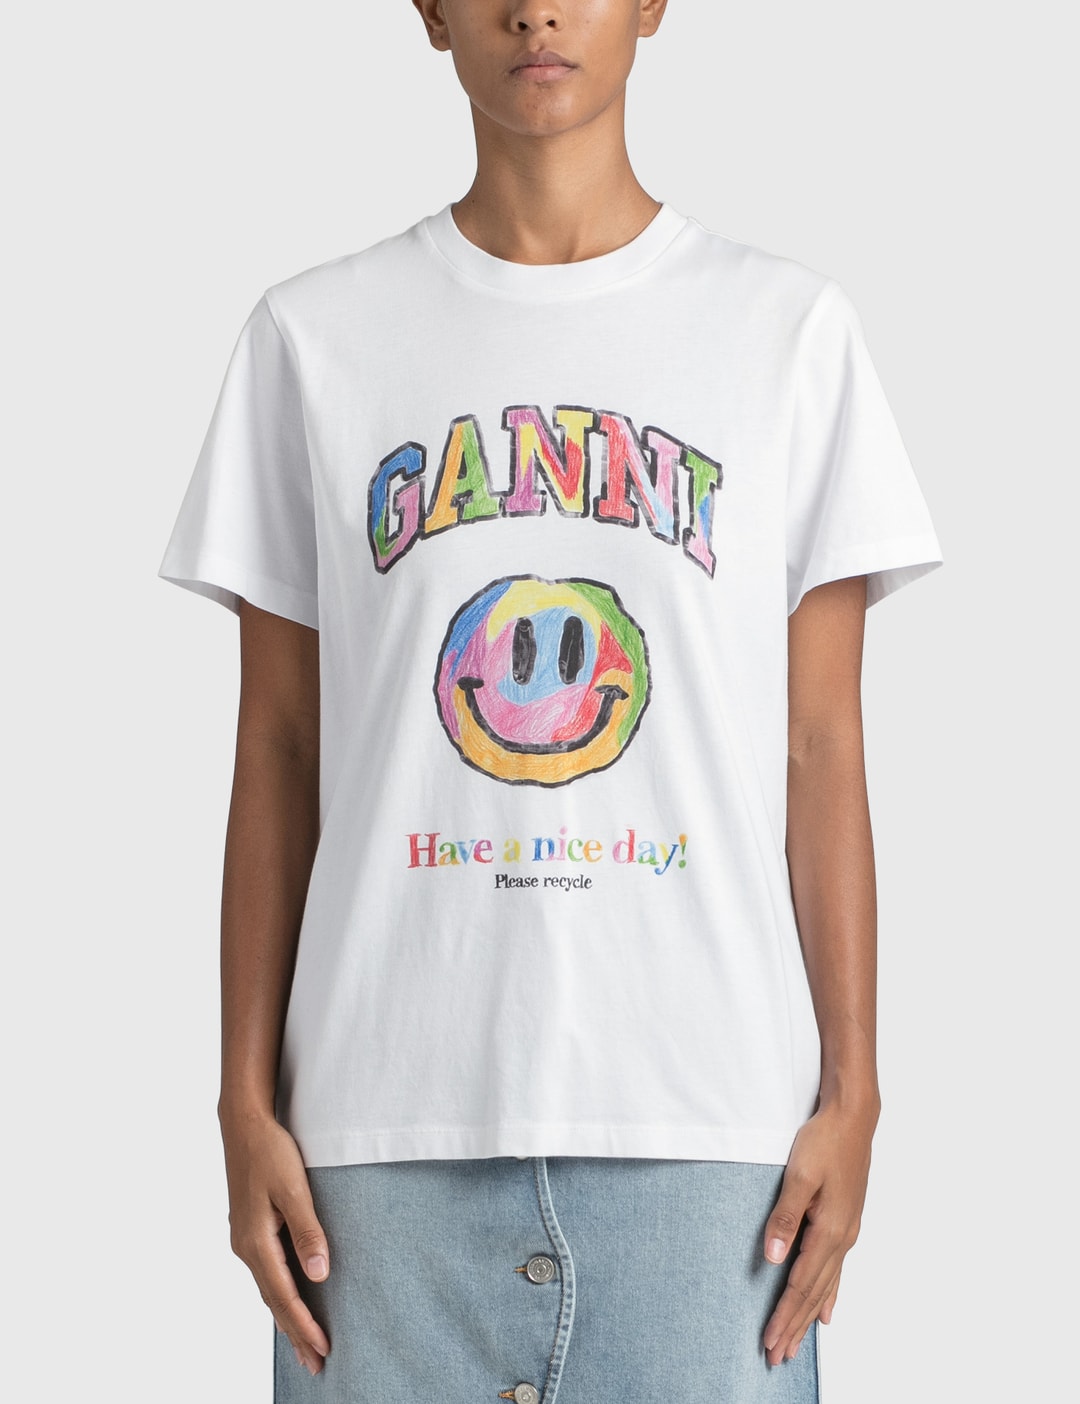 Ganni - Rainbow Smiley T-shirt | HBX Globally Curated Fashion and Lifestyle by